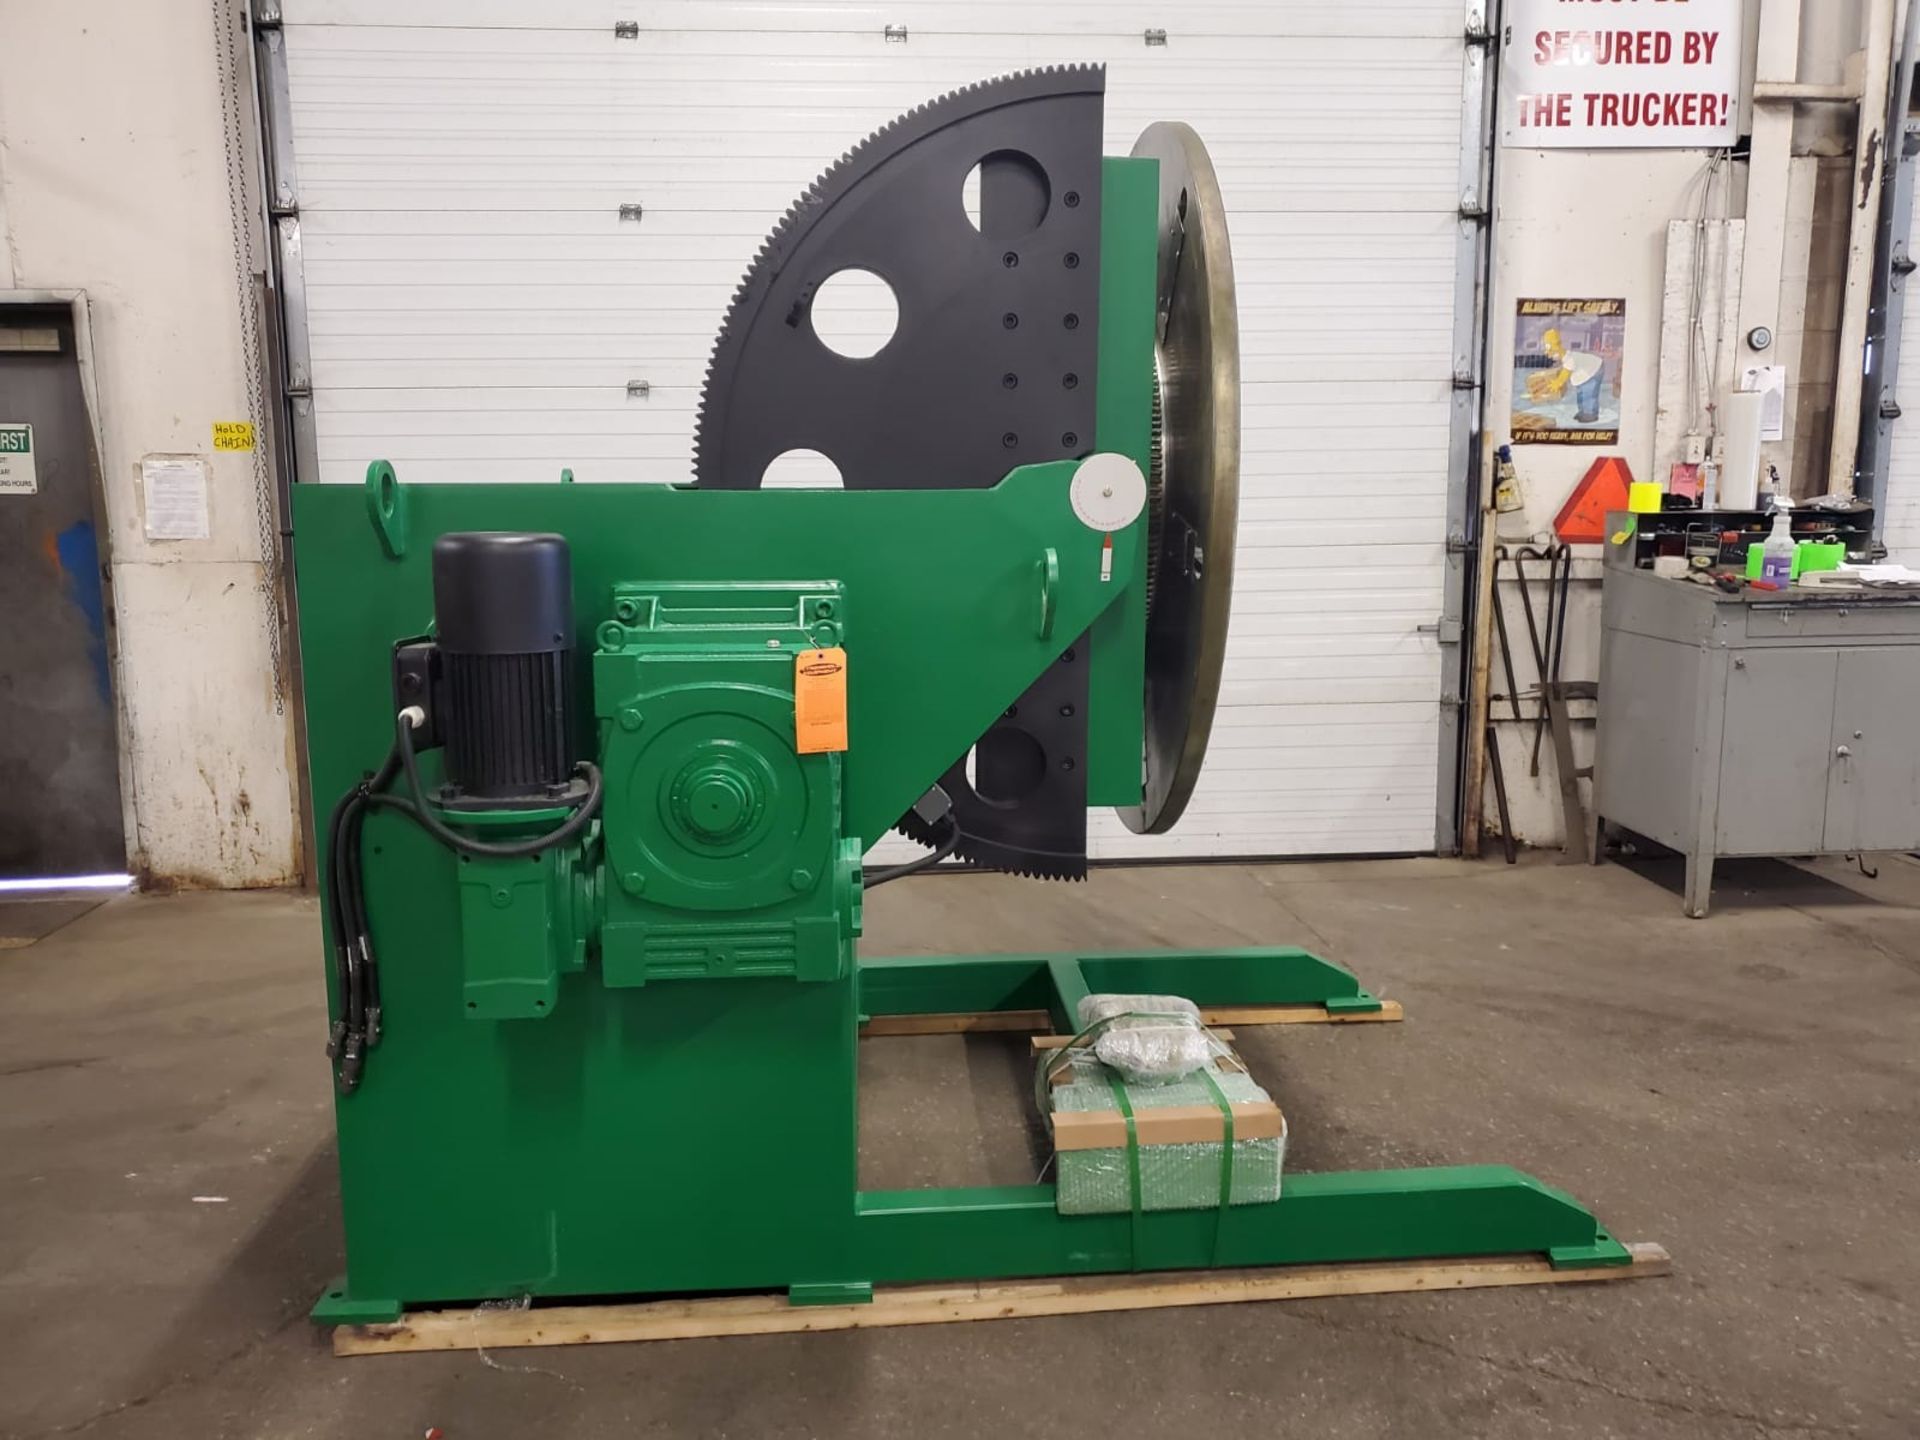 Verner model VD-12000 WELDING POSITIONER 12000lbs capacity - tilt and rotate with variable speed